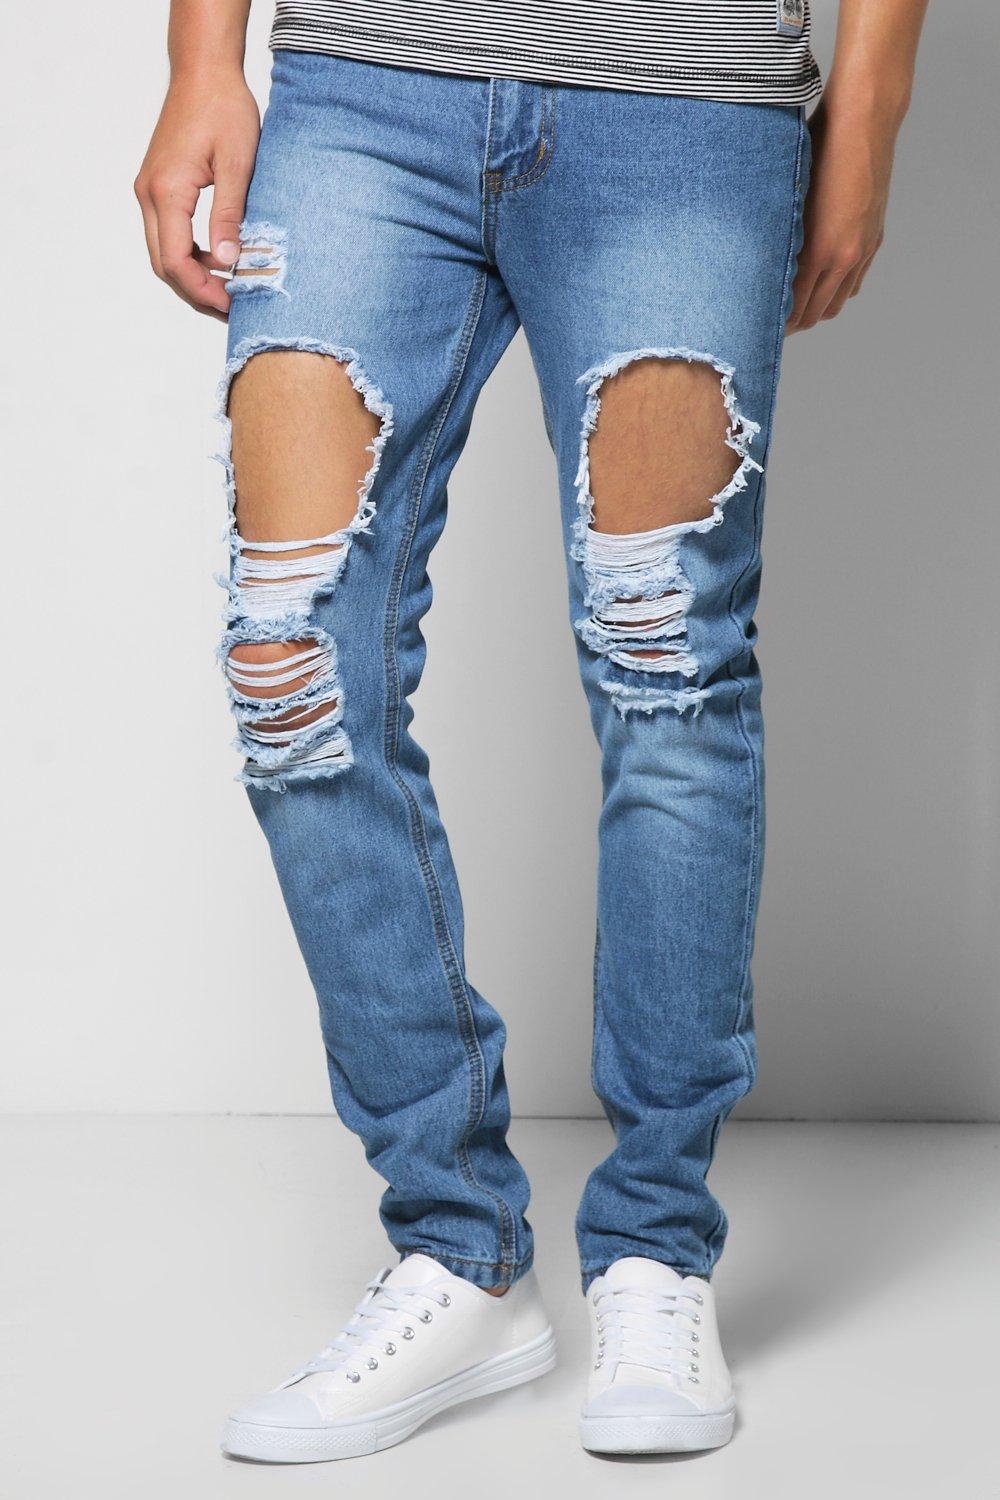 mens thigh ripped jeans